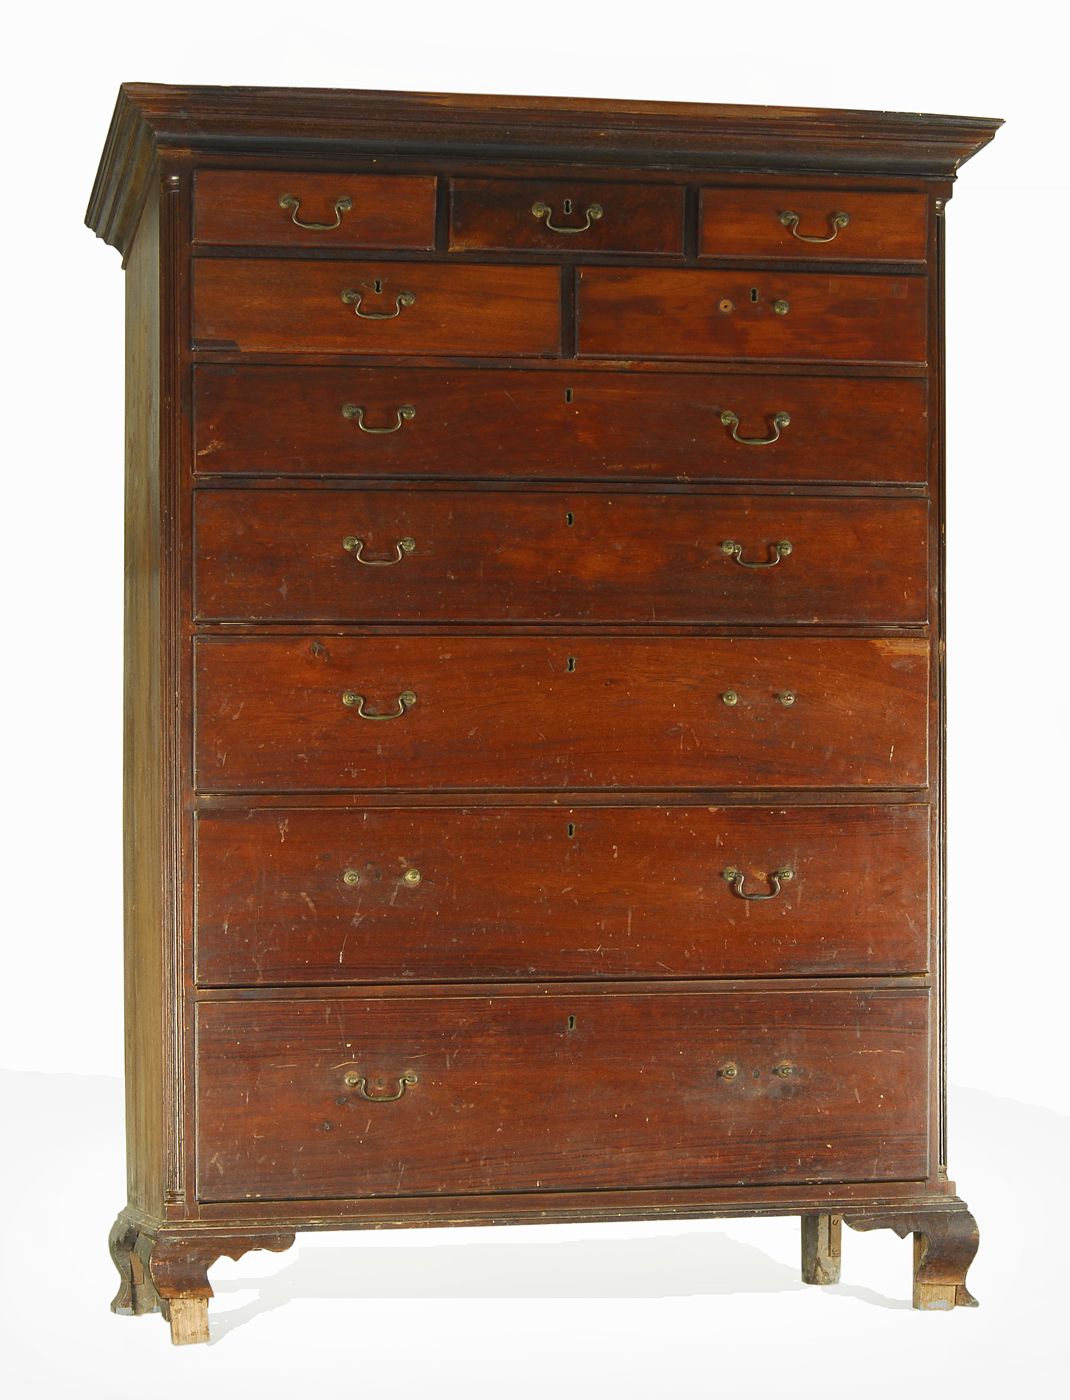 ANTIQUE AMERICAN CHIPPENDALE TEN-DRAWER TALL